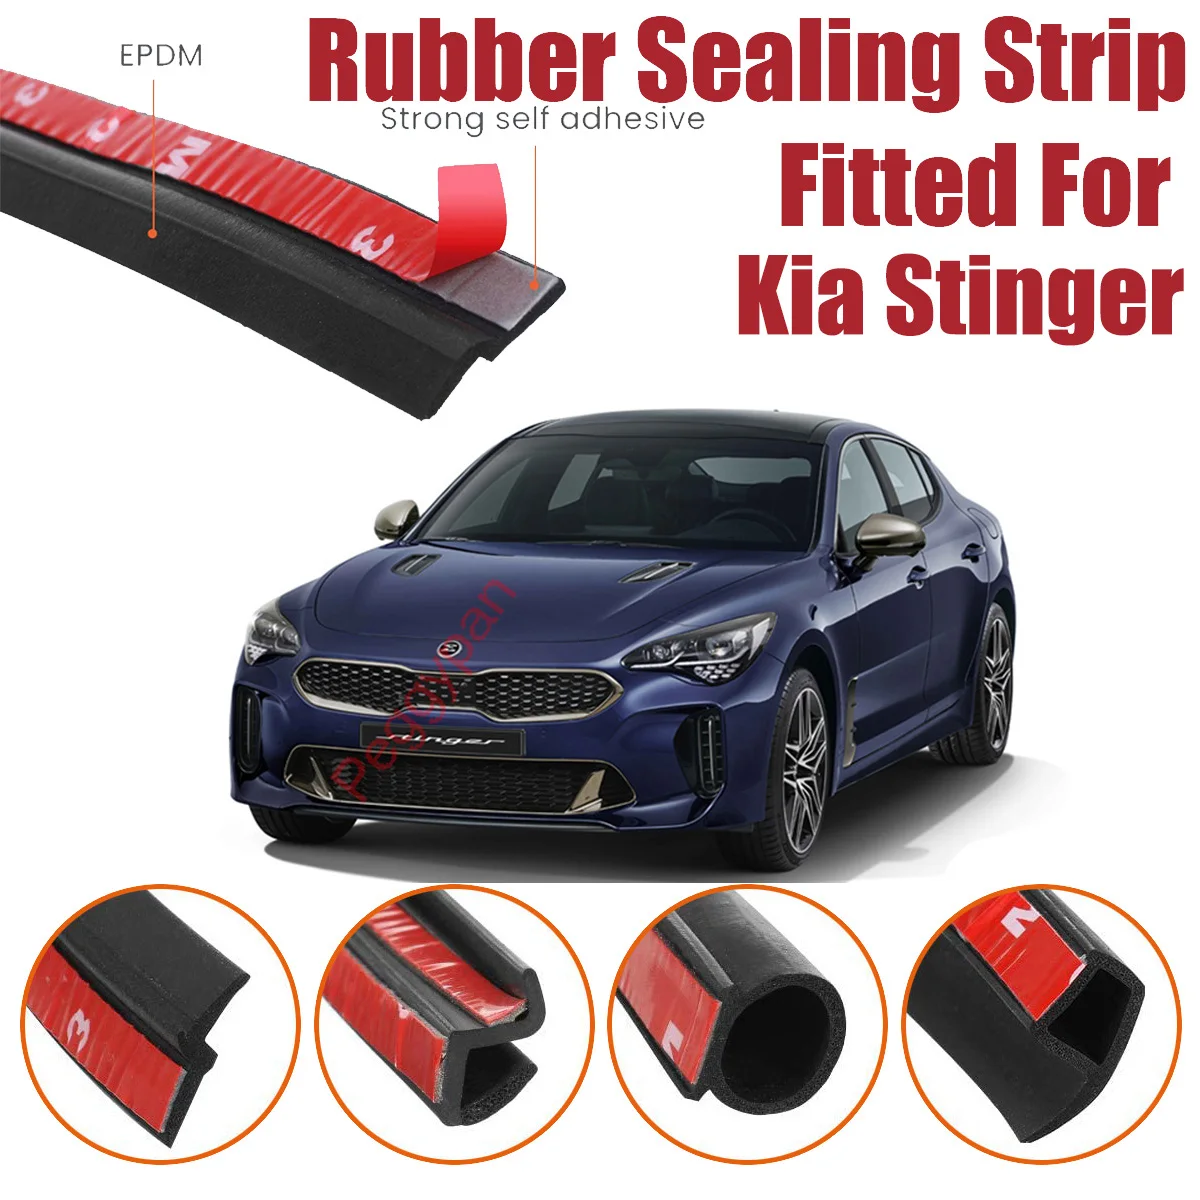 Door Seal Strip Kit Self Adhesive Window Engine Cover Soundproof Rubber Weather Draft Wind Noise Reduction Fit For Kia Stinger